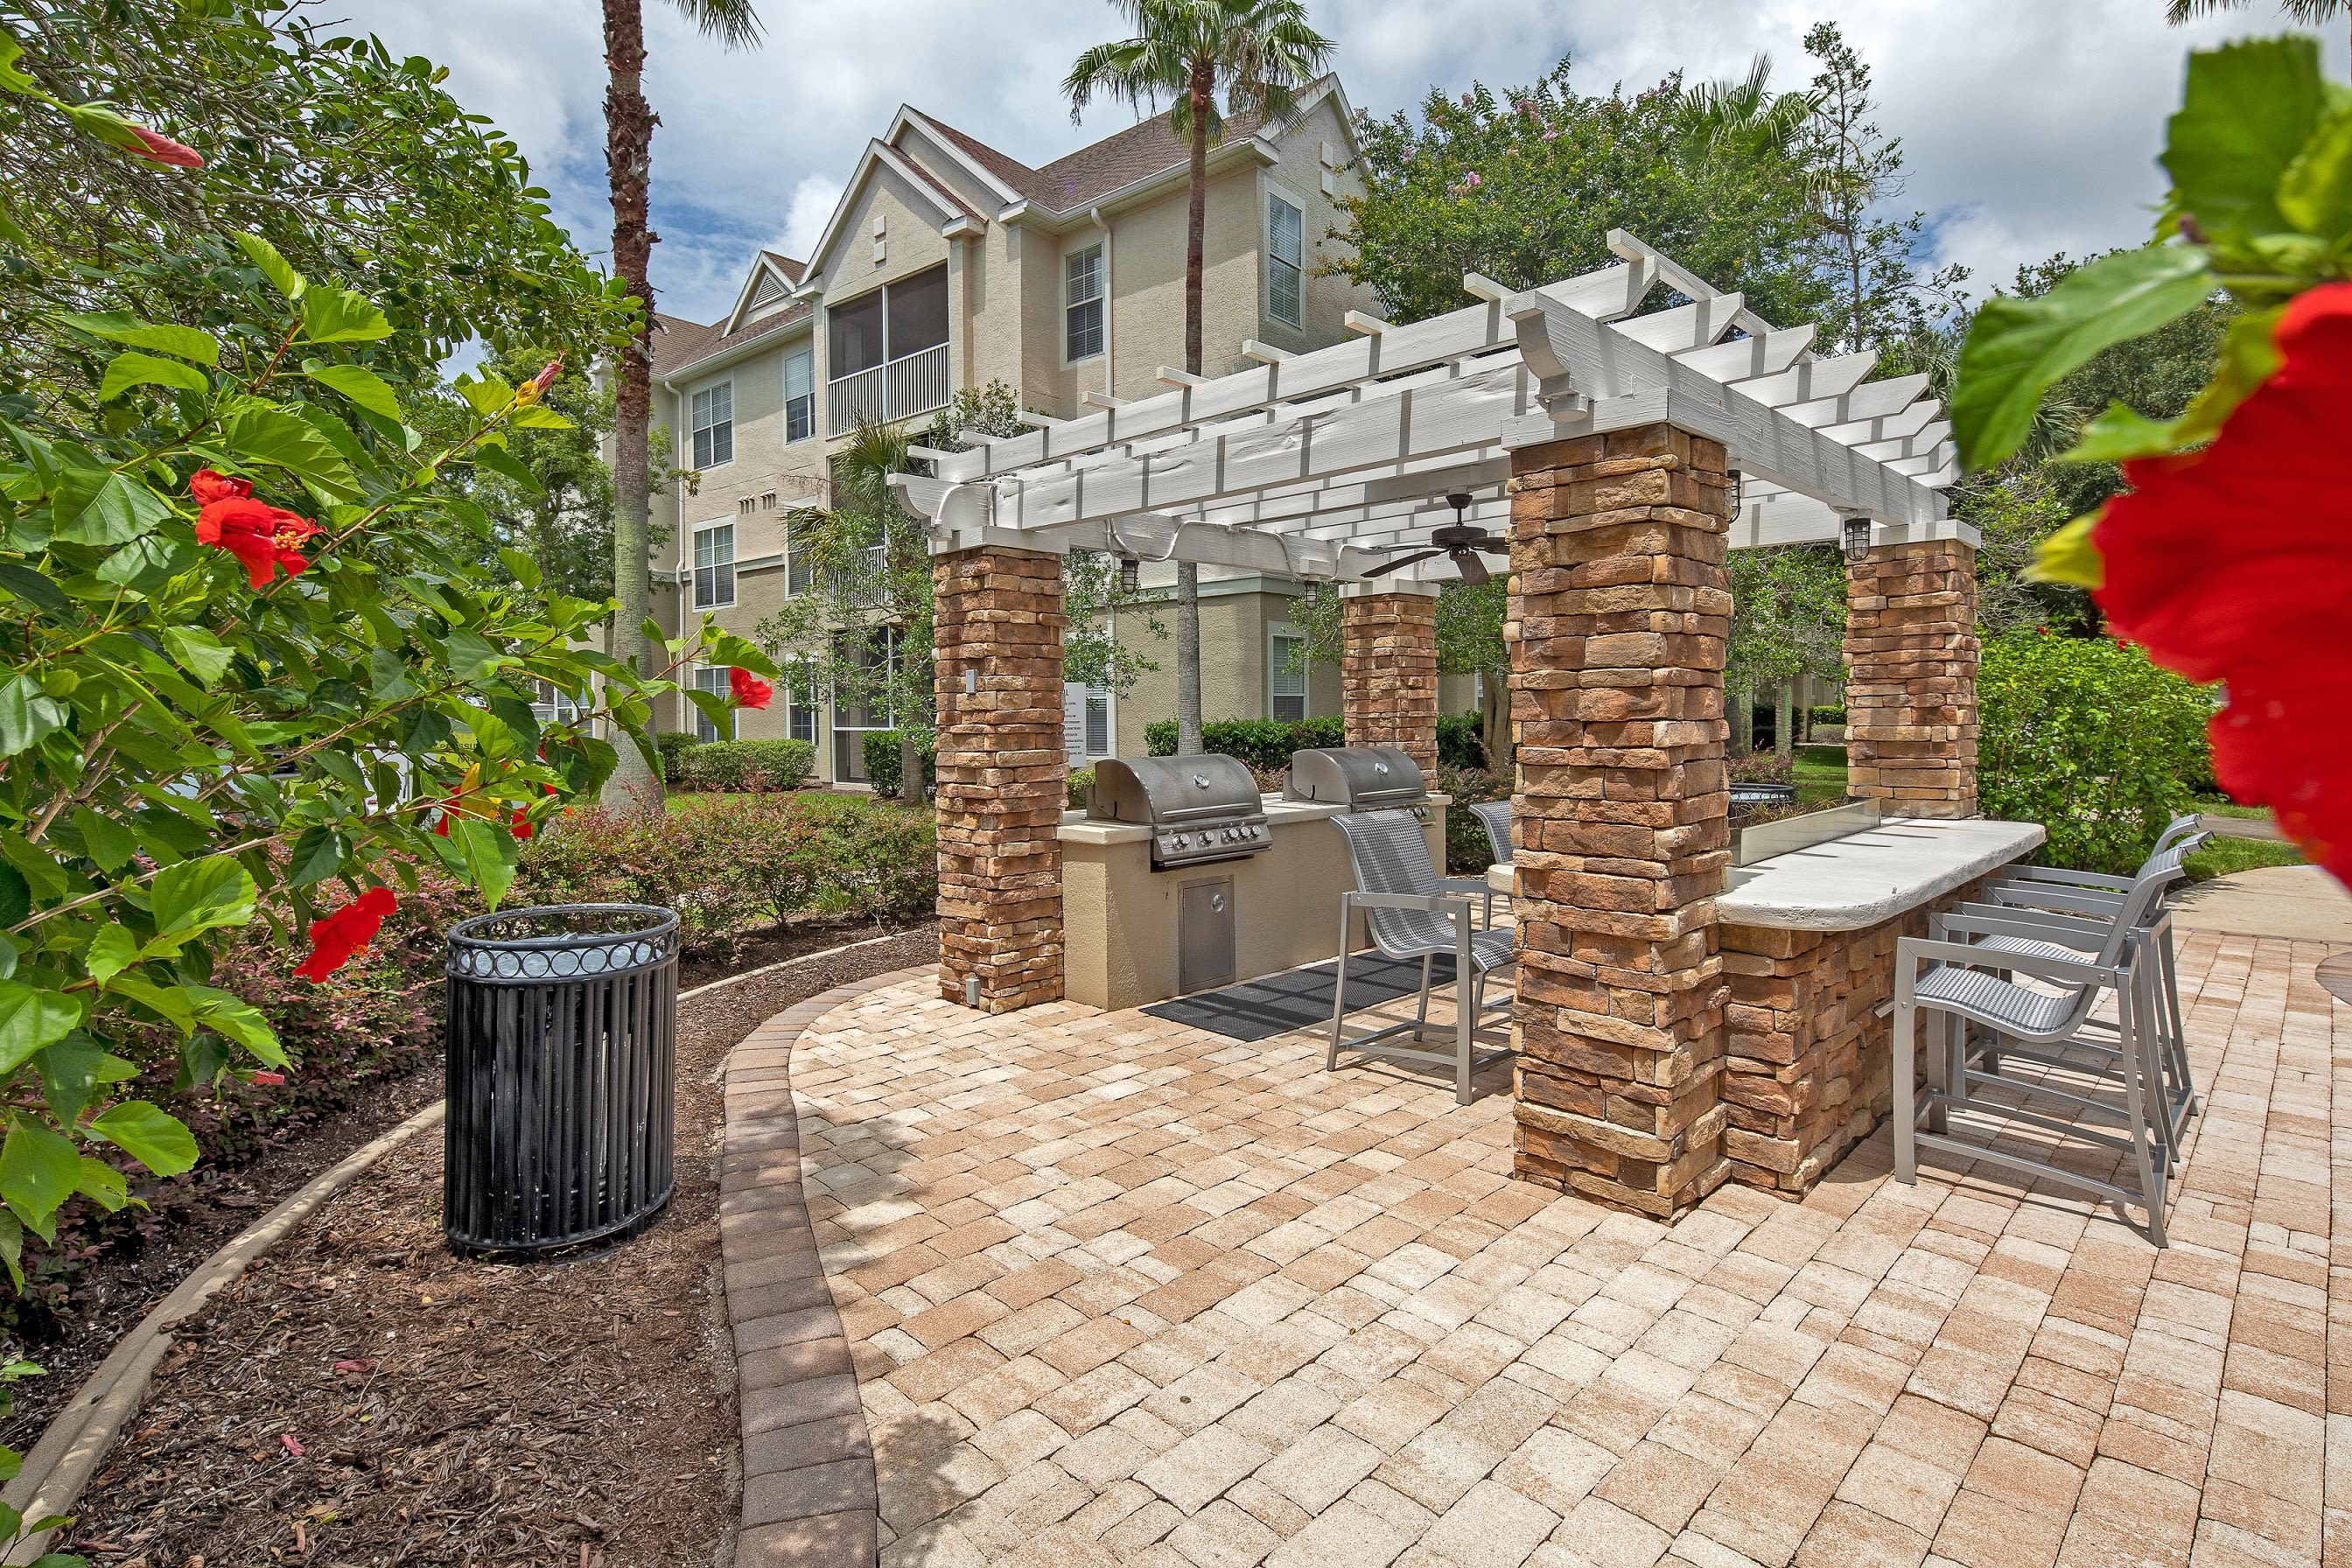 Amazing outdoor grilling area near the pool in Jacksonville, Florida near Eddison at Deerwood Park